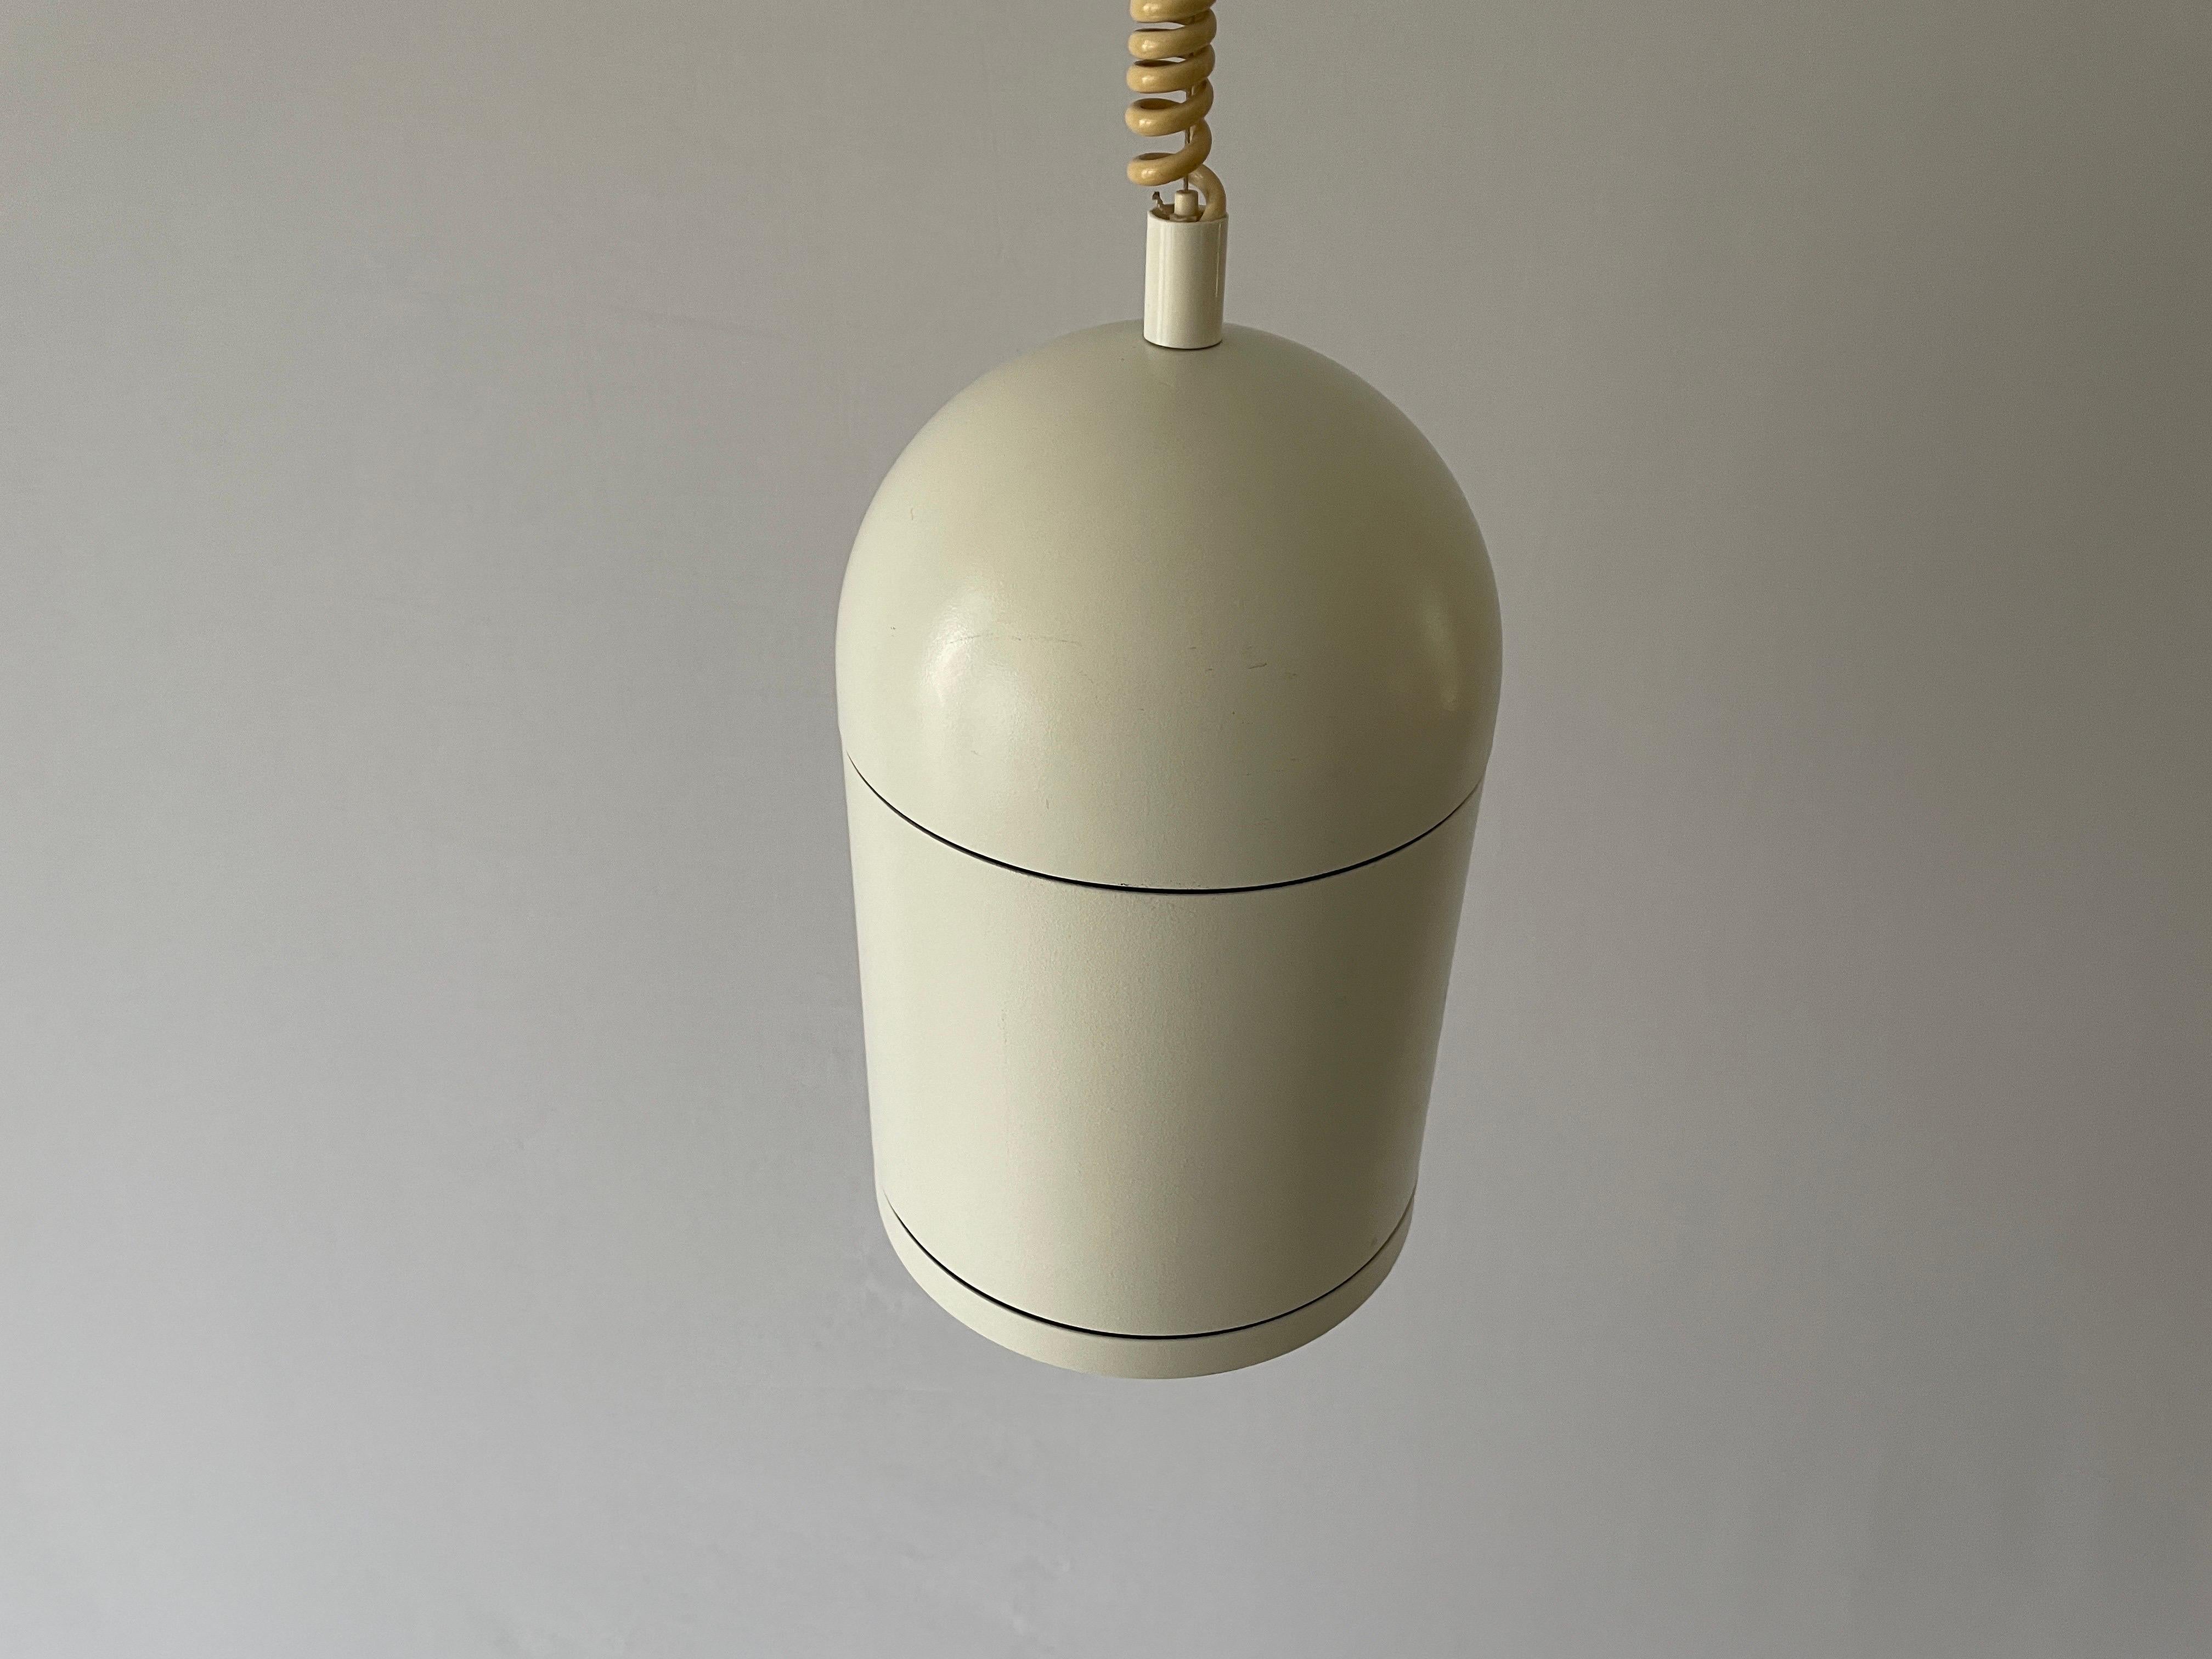 White Metal Adjustable Pendant Lamp by BEGA, 1960s, Germany

Lamp is in very good vintage condition.
Wear consistent with age and use

These lamp works with fluorescent standard light bulb. 
Wired and suitable to use in all countries. (110-220